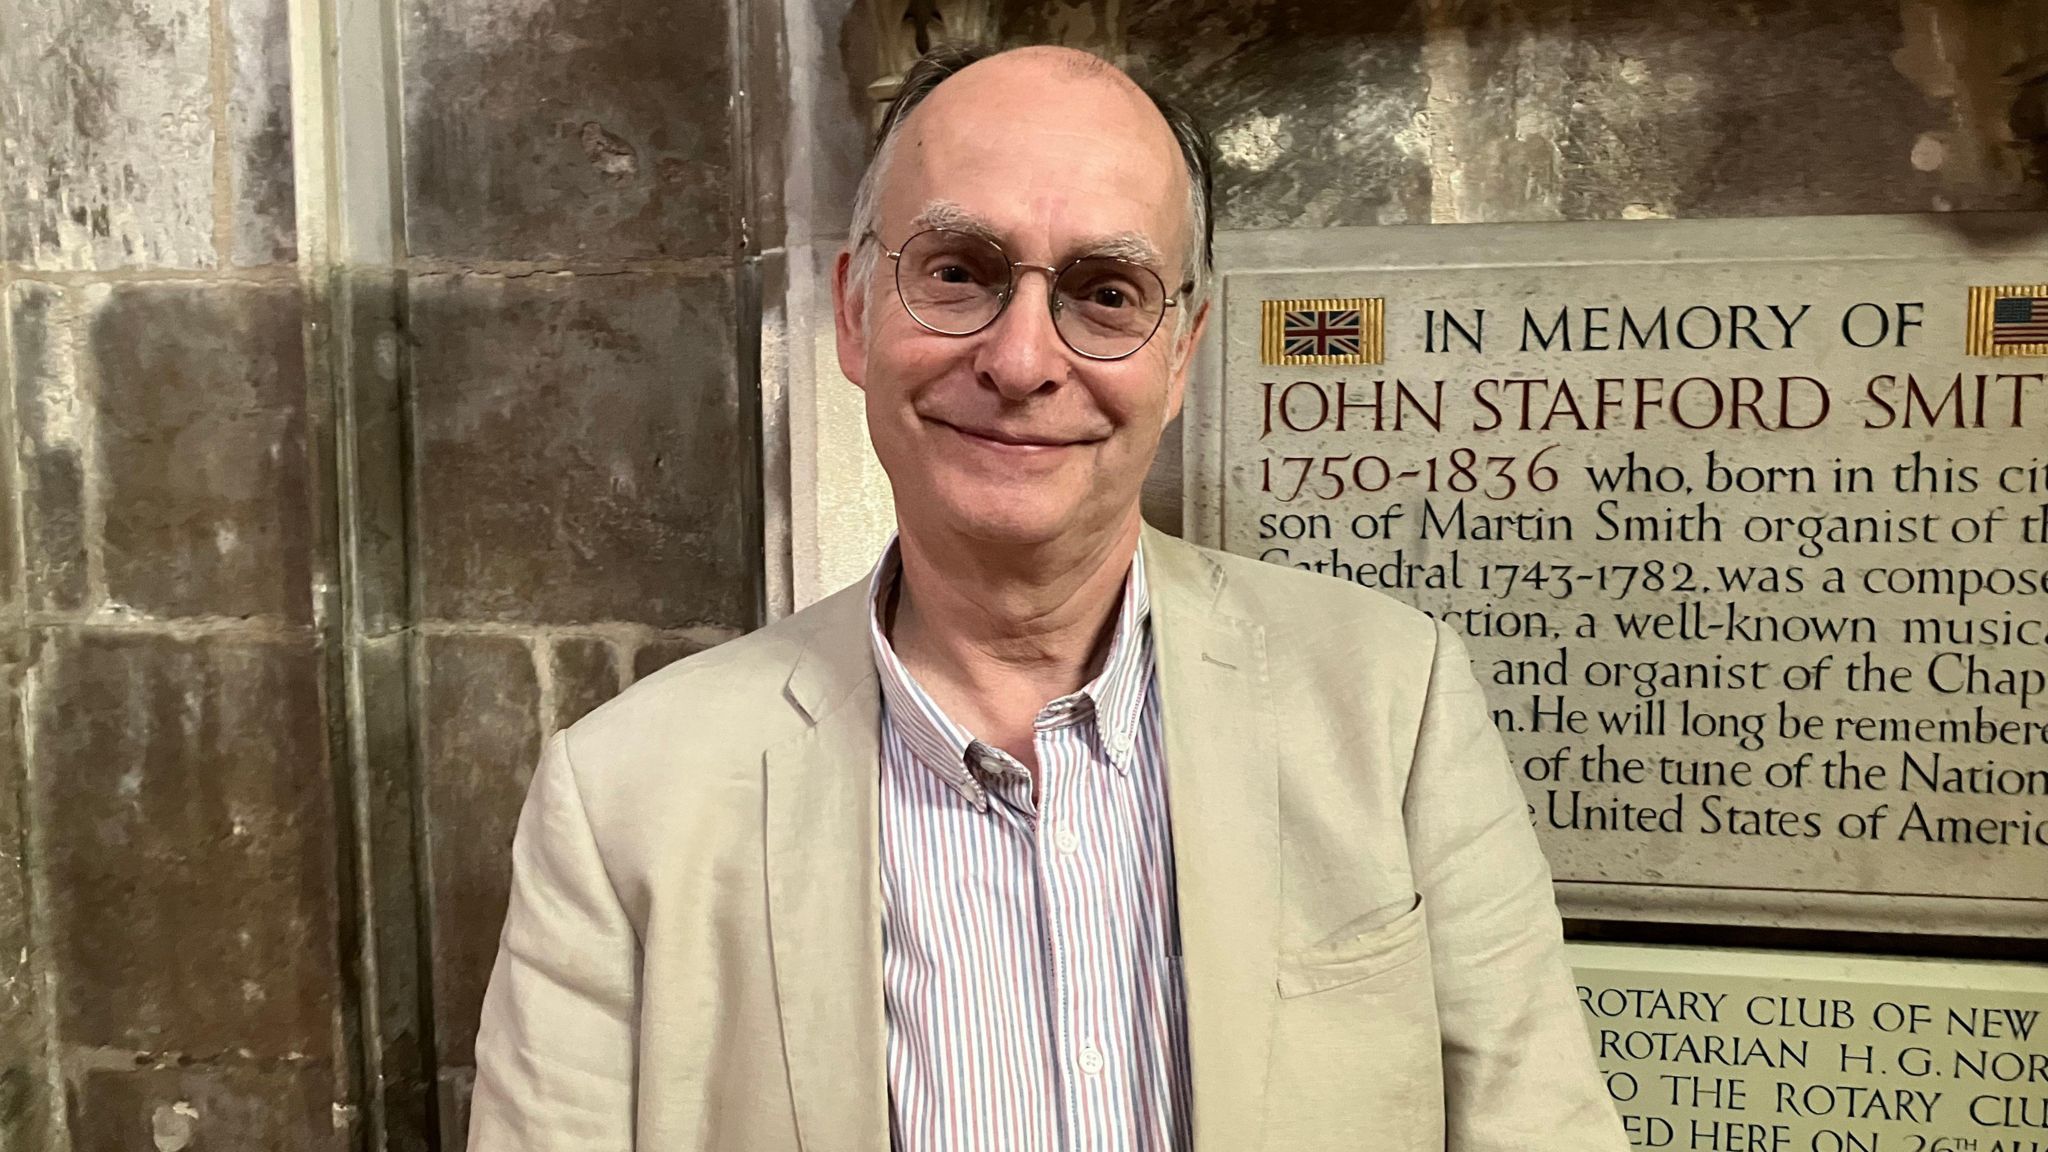 Adrian Partington wearing a striped shirt and glasses. He is smiling and standing in front of a plaque dedicated to John Stafford Smith